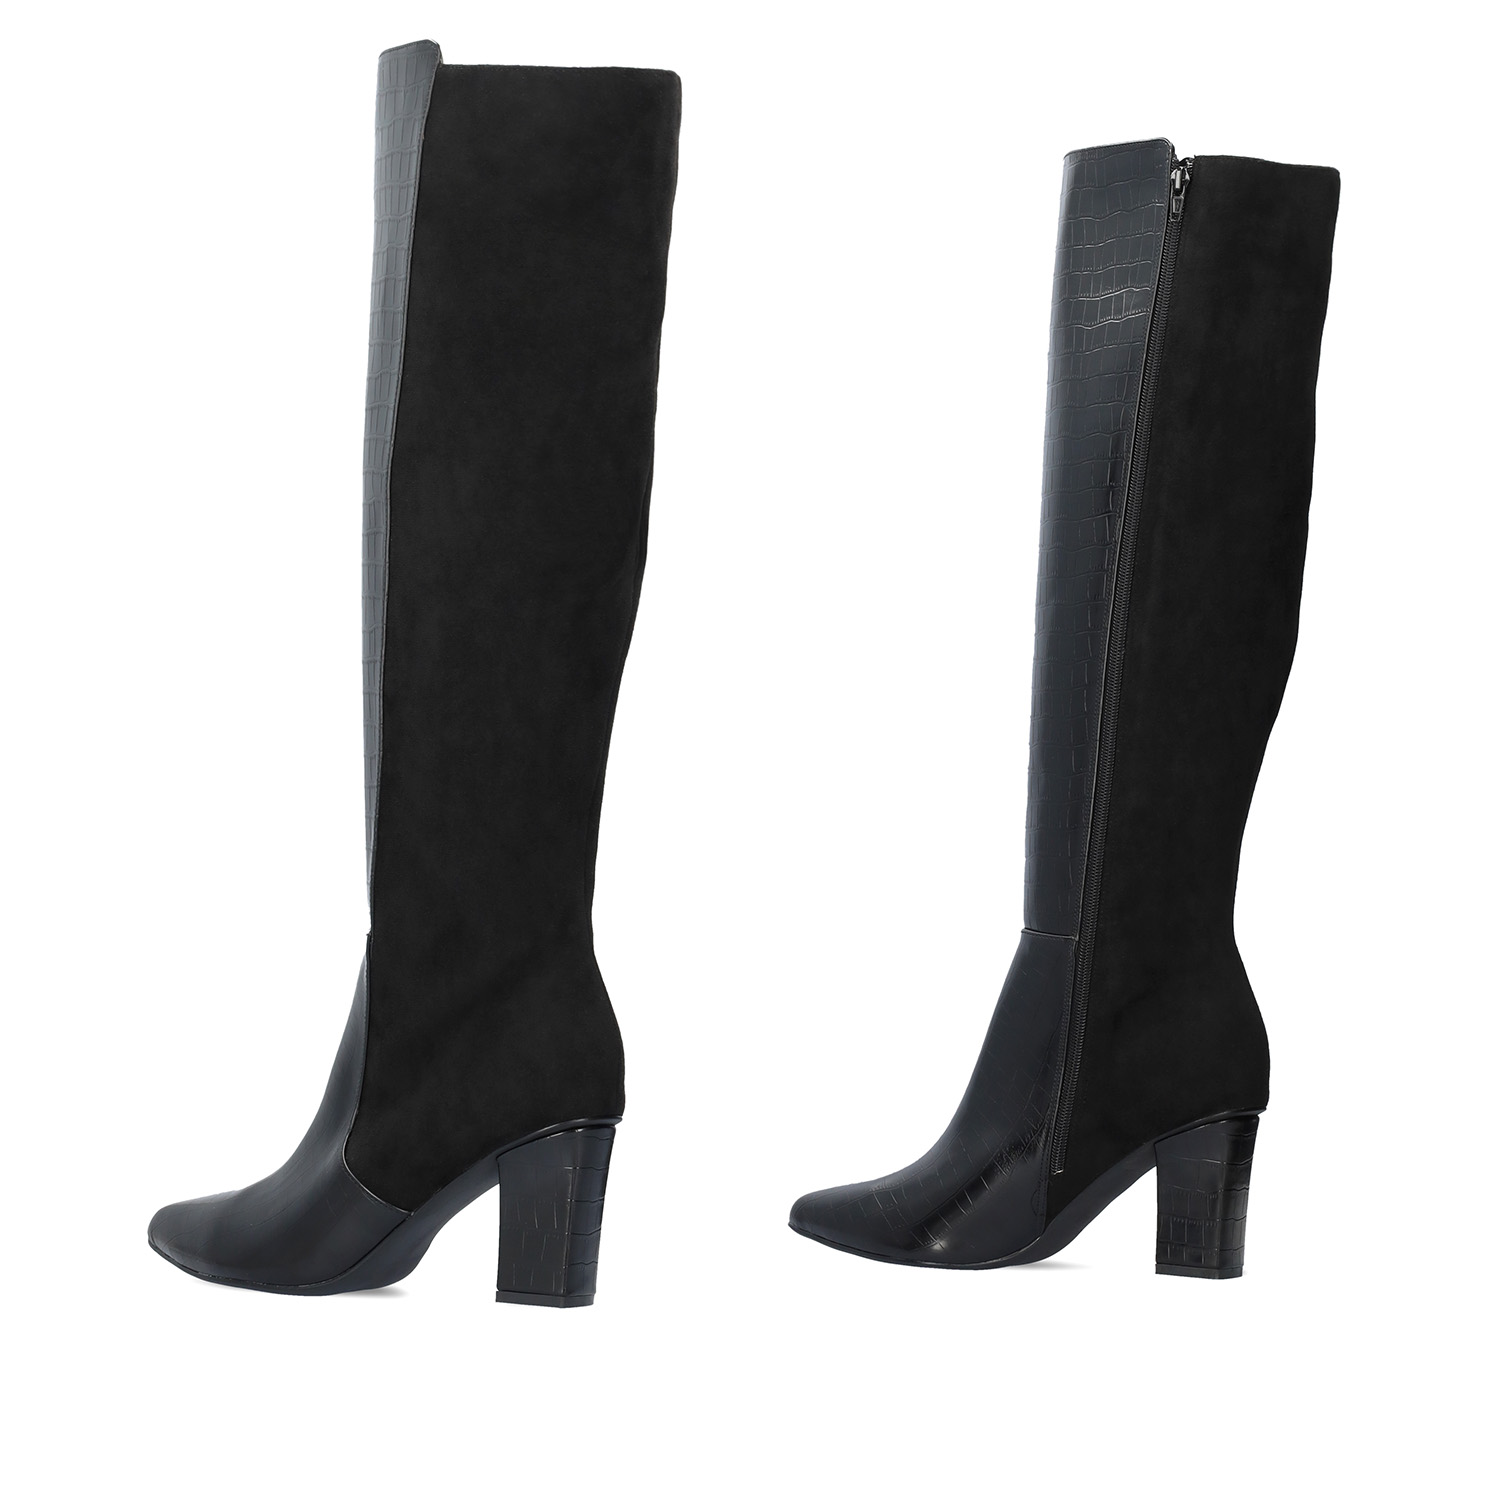 Heeled knee-high boots combined black faux croc leather with faux suede ...